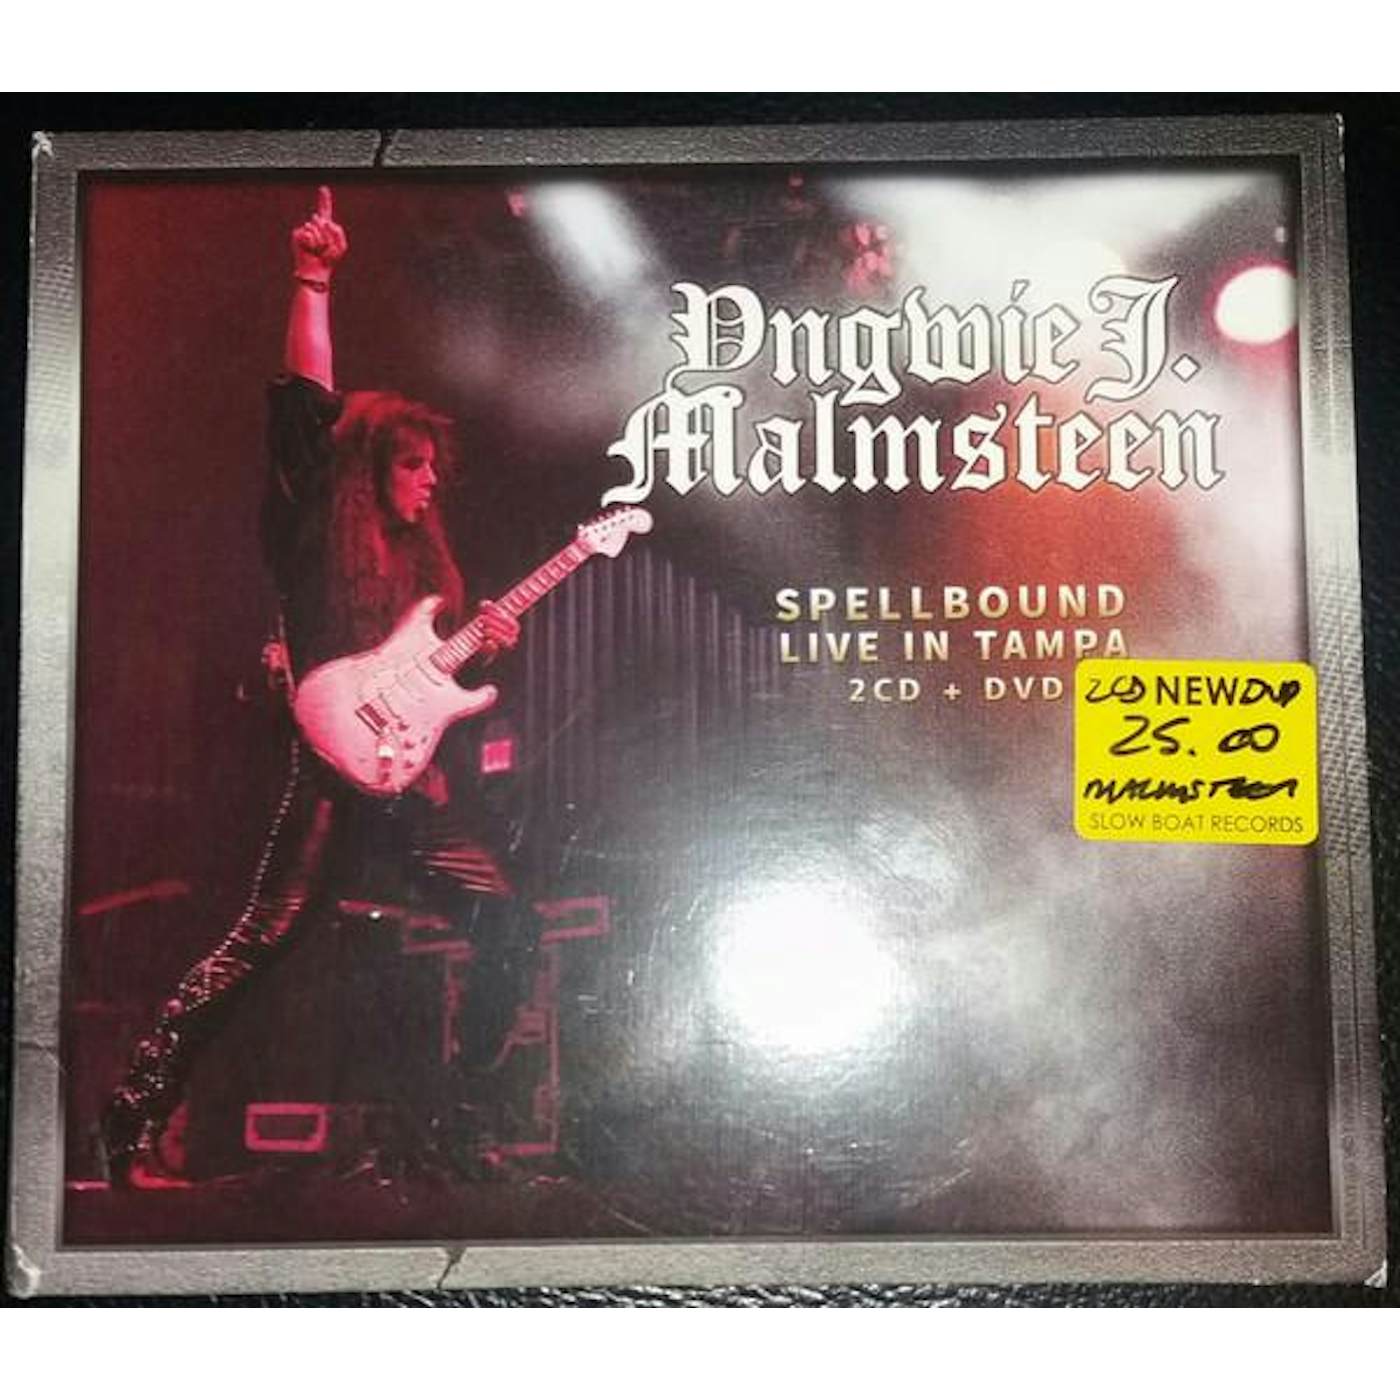 Yngwie Malmsteen SPELLBOUND: LIVE IN TAMPA CD